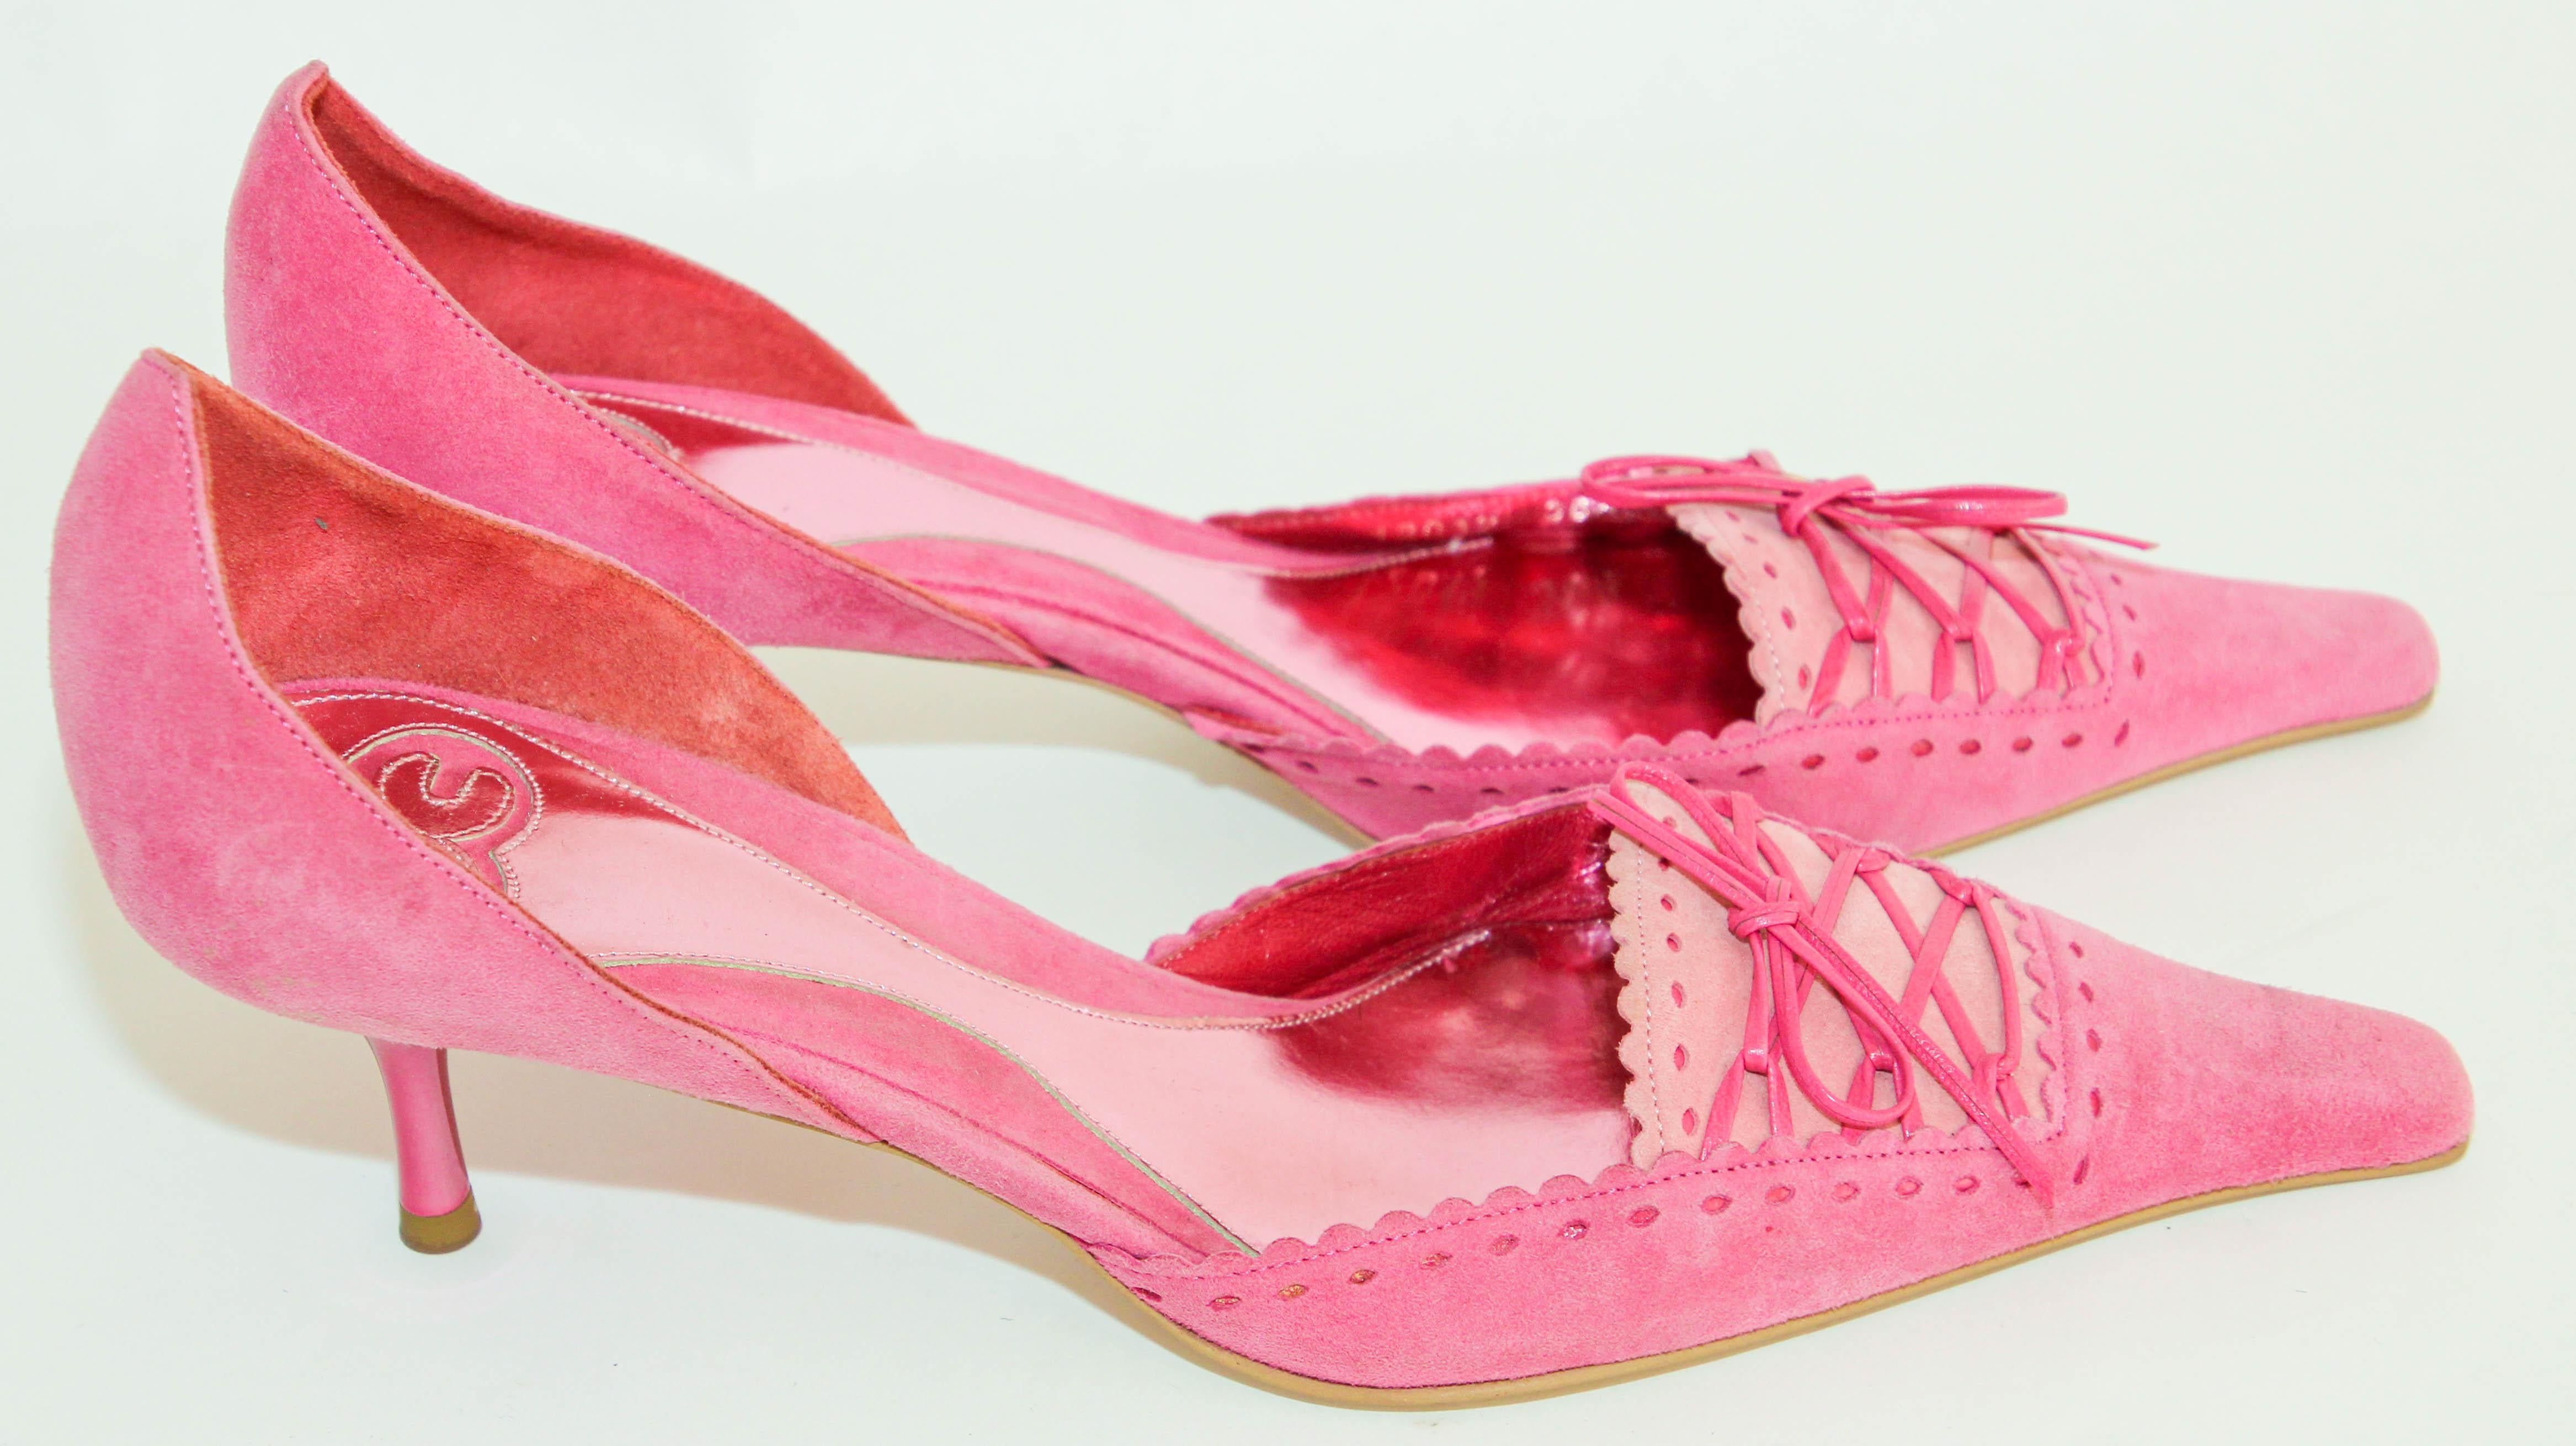 Escada Hot Pink Suede Pumps with Leather Details Size 36.5 Italy 7